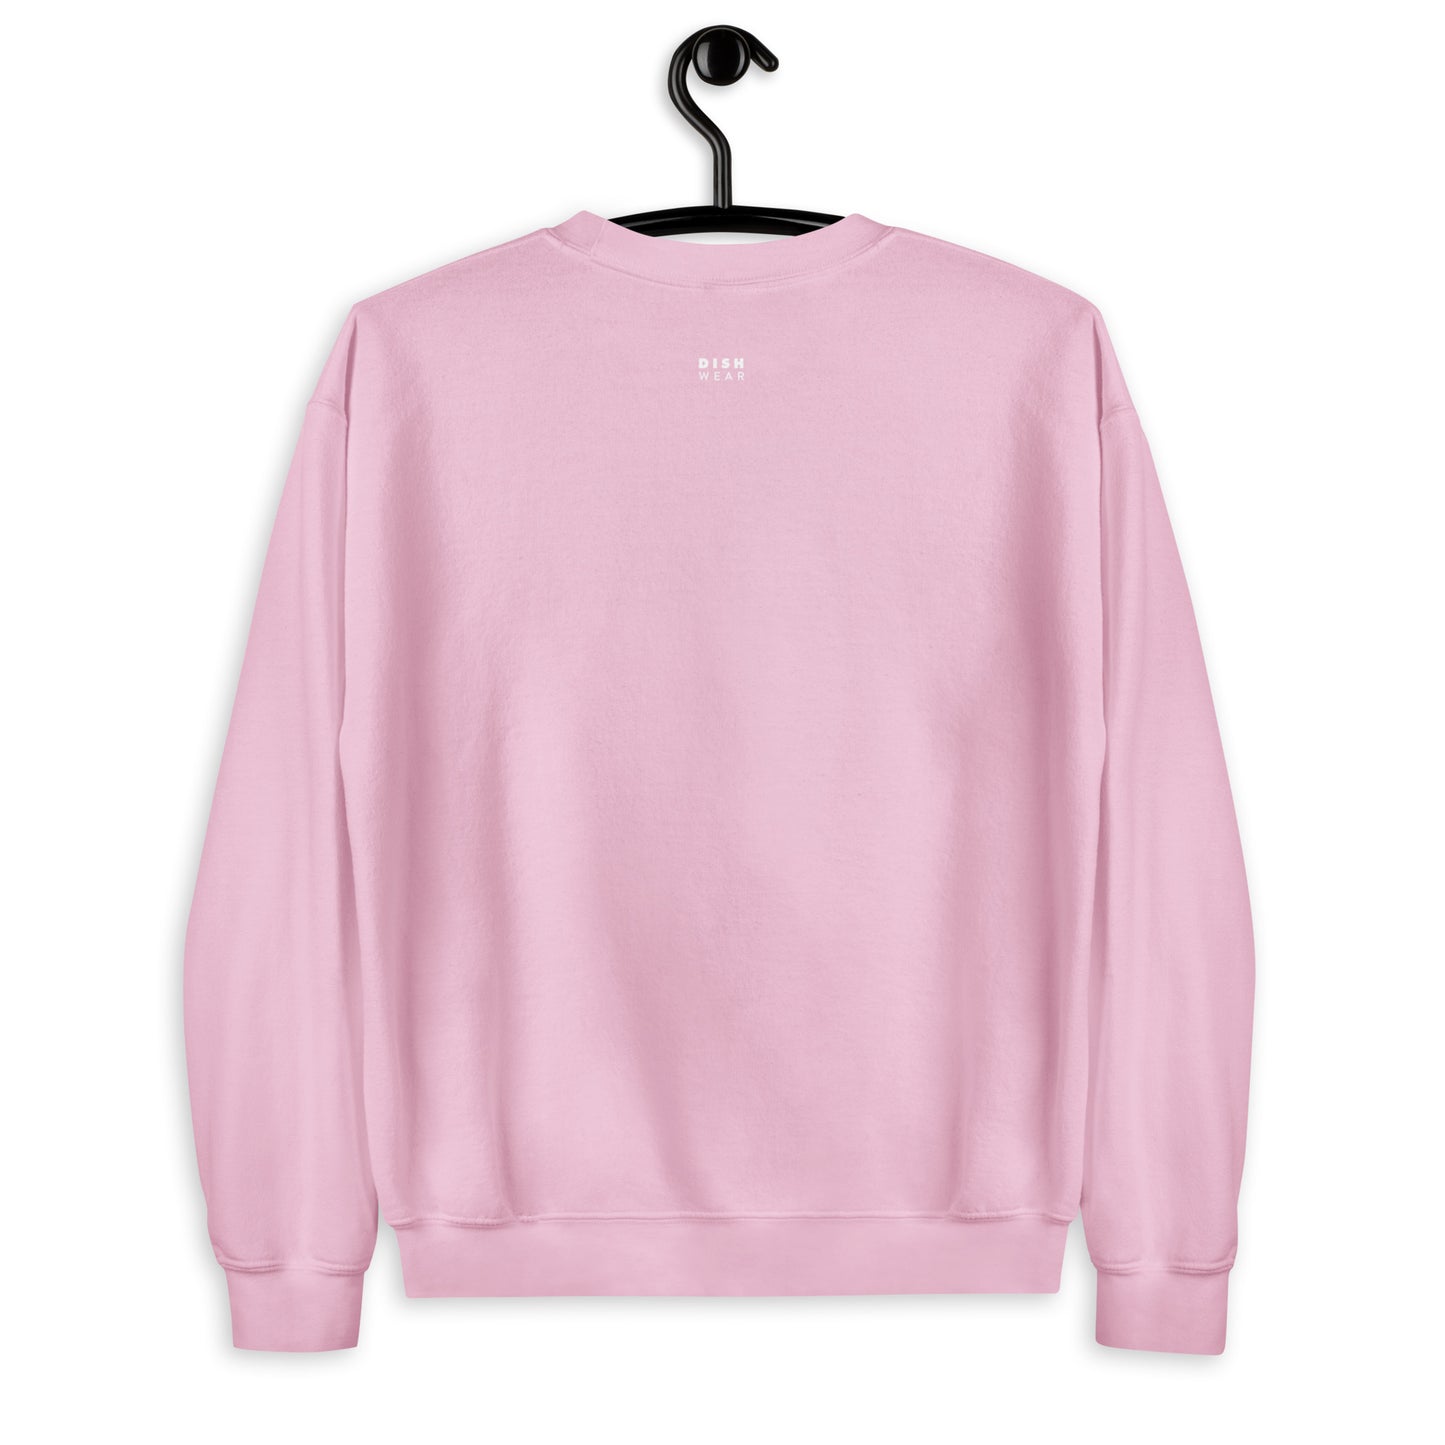 Panettone Sweatshirt - Arched Font